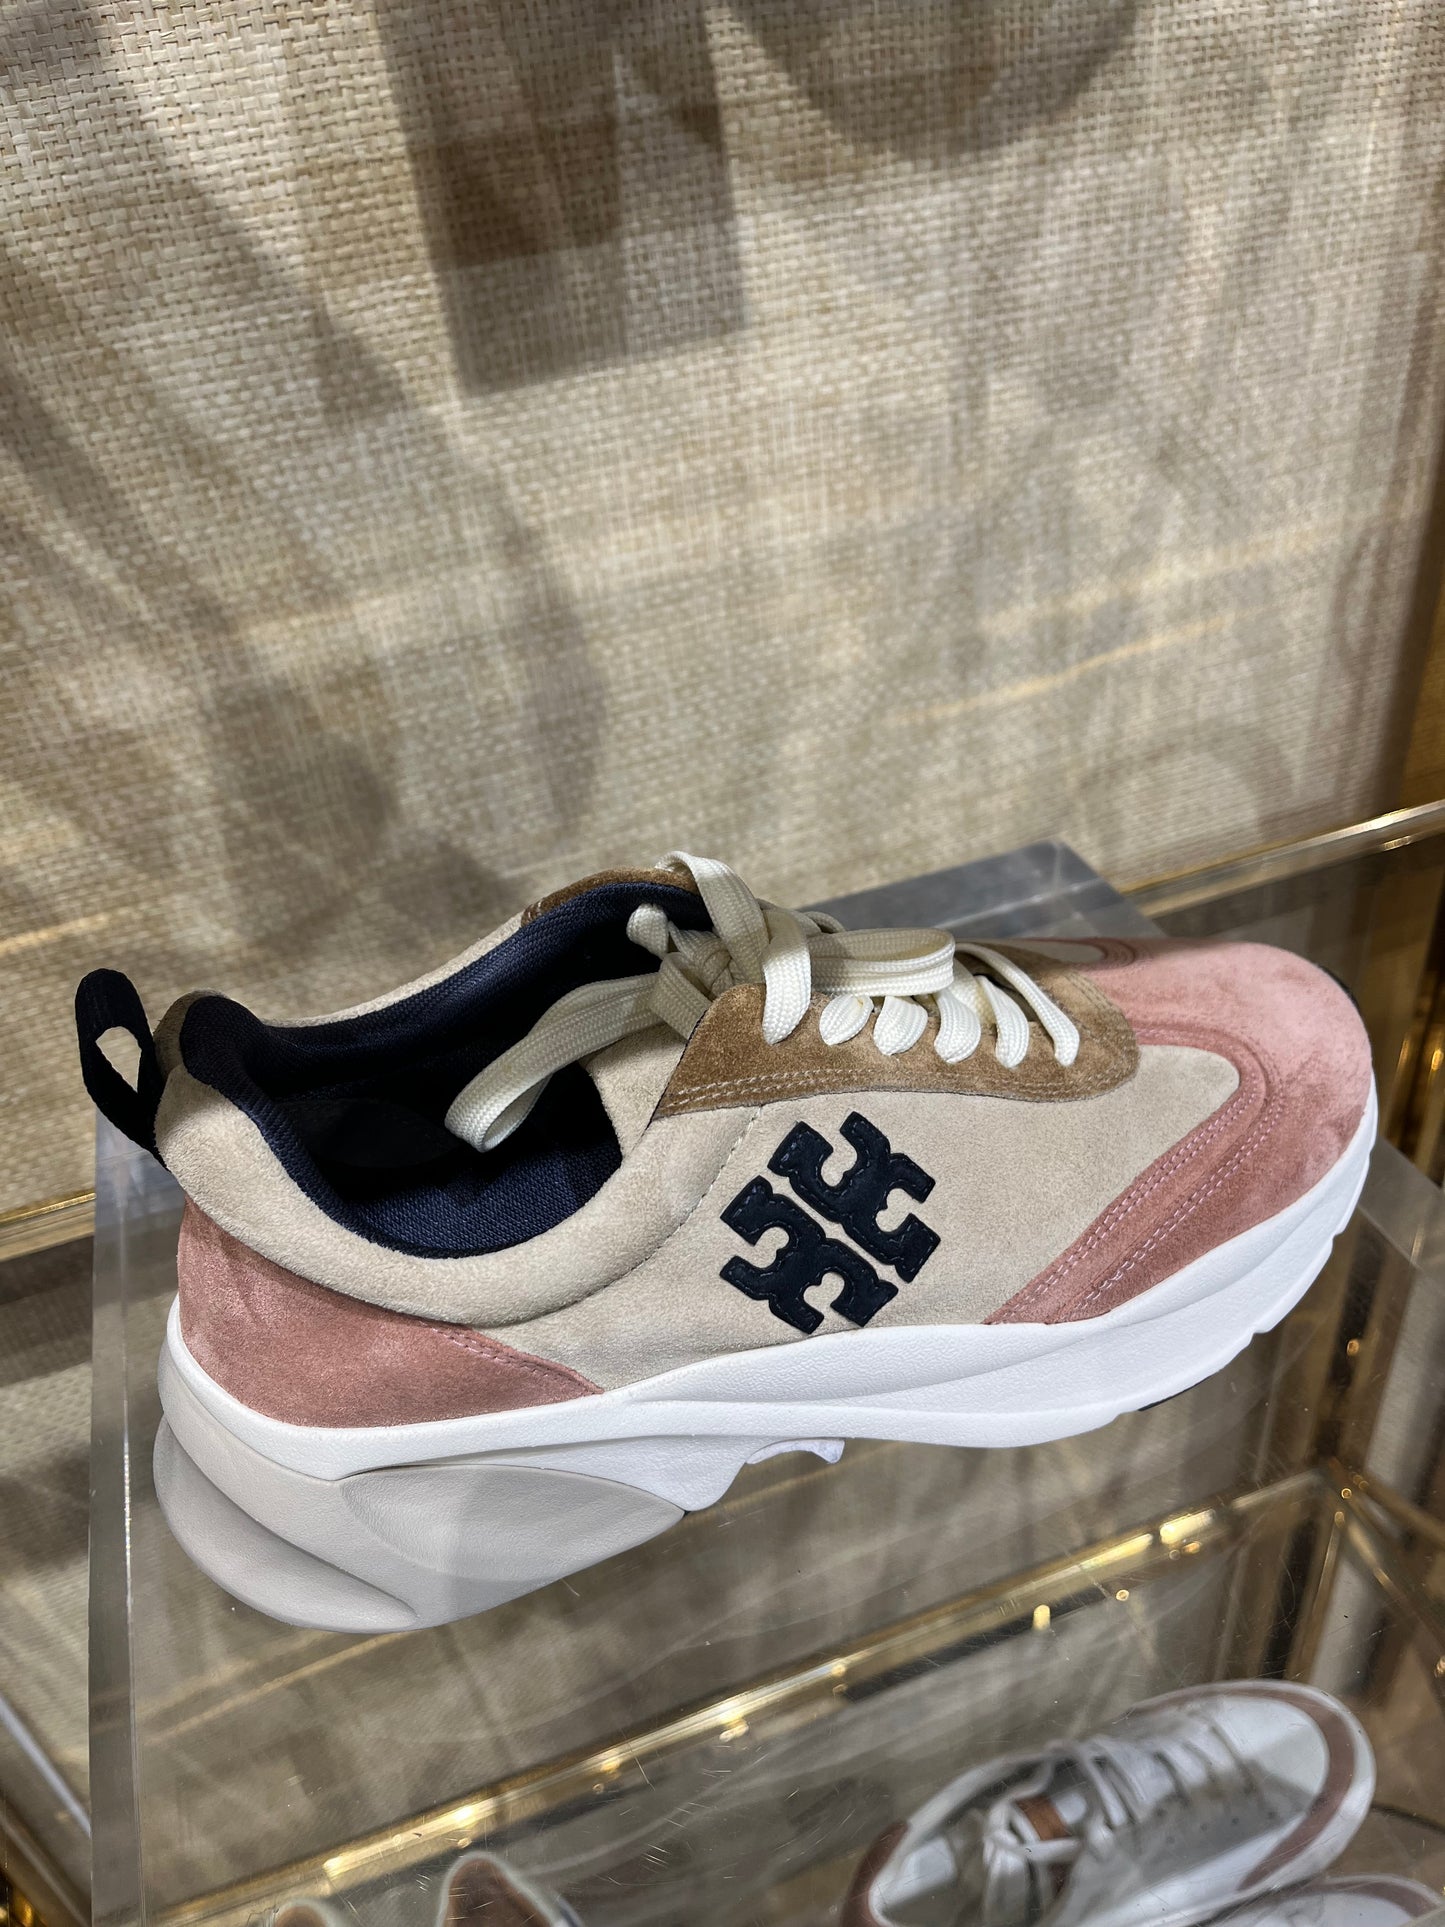 Tory Burch Good Luck Trainer, Tan / Blue / Pink, Style 85463, Retail $278